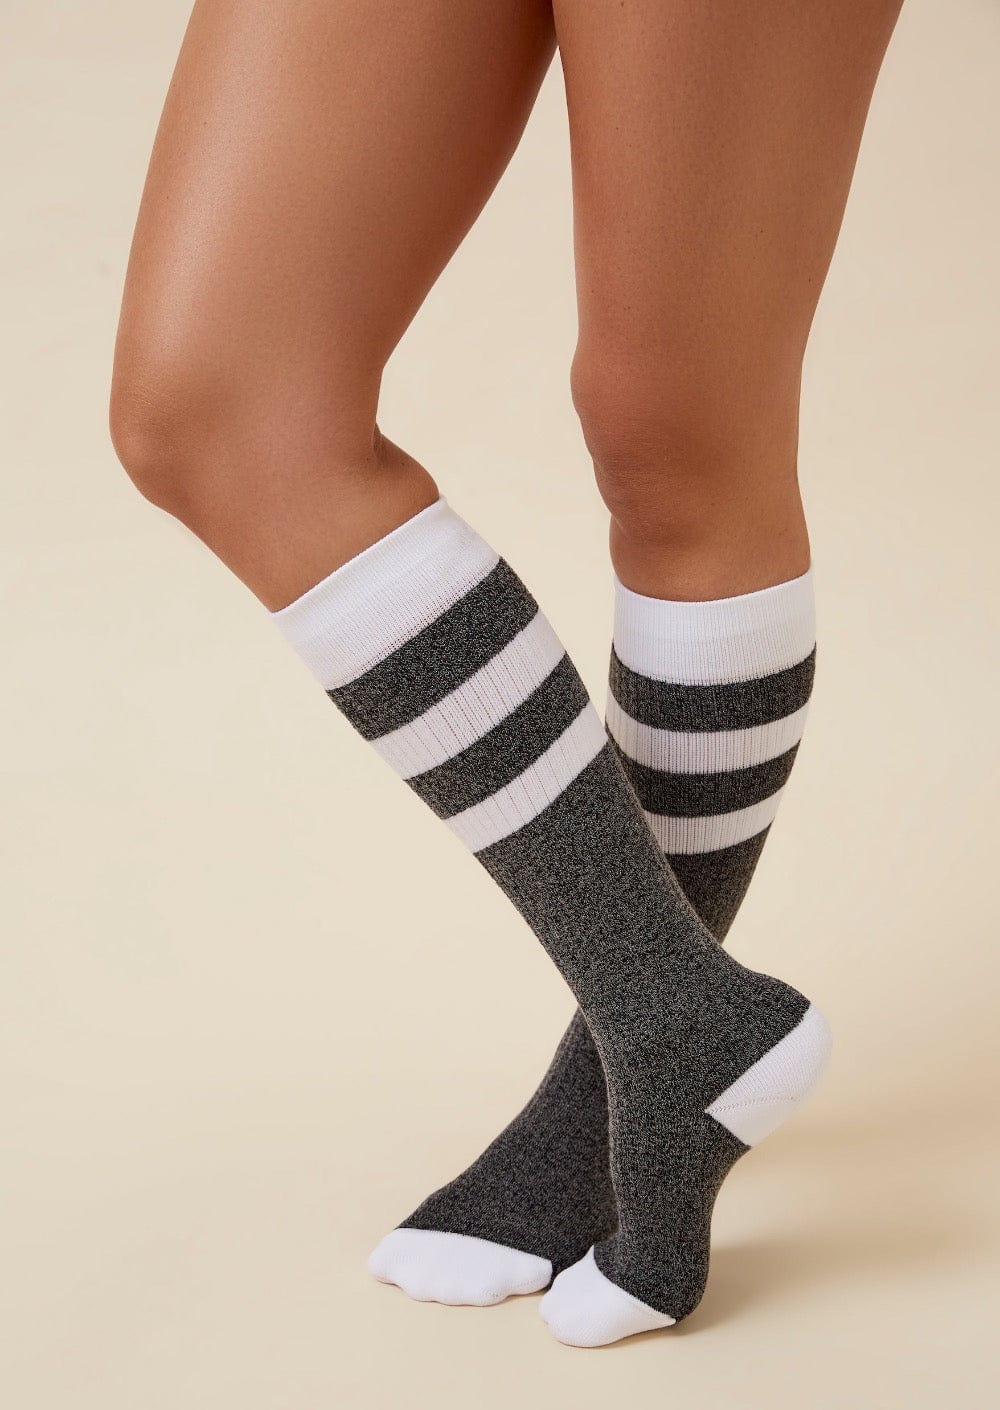 Thery Group Socks Charcoal Marle/White The Comforter Maternity Compression Sock for edema cankles travel & hospital side view